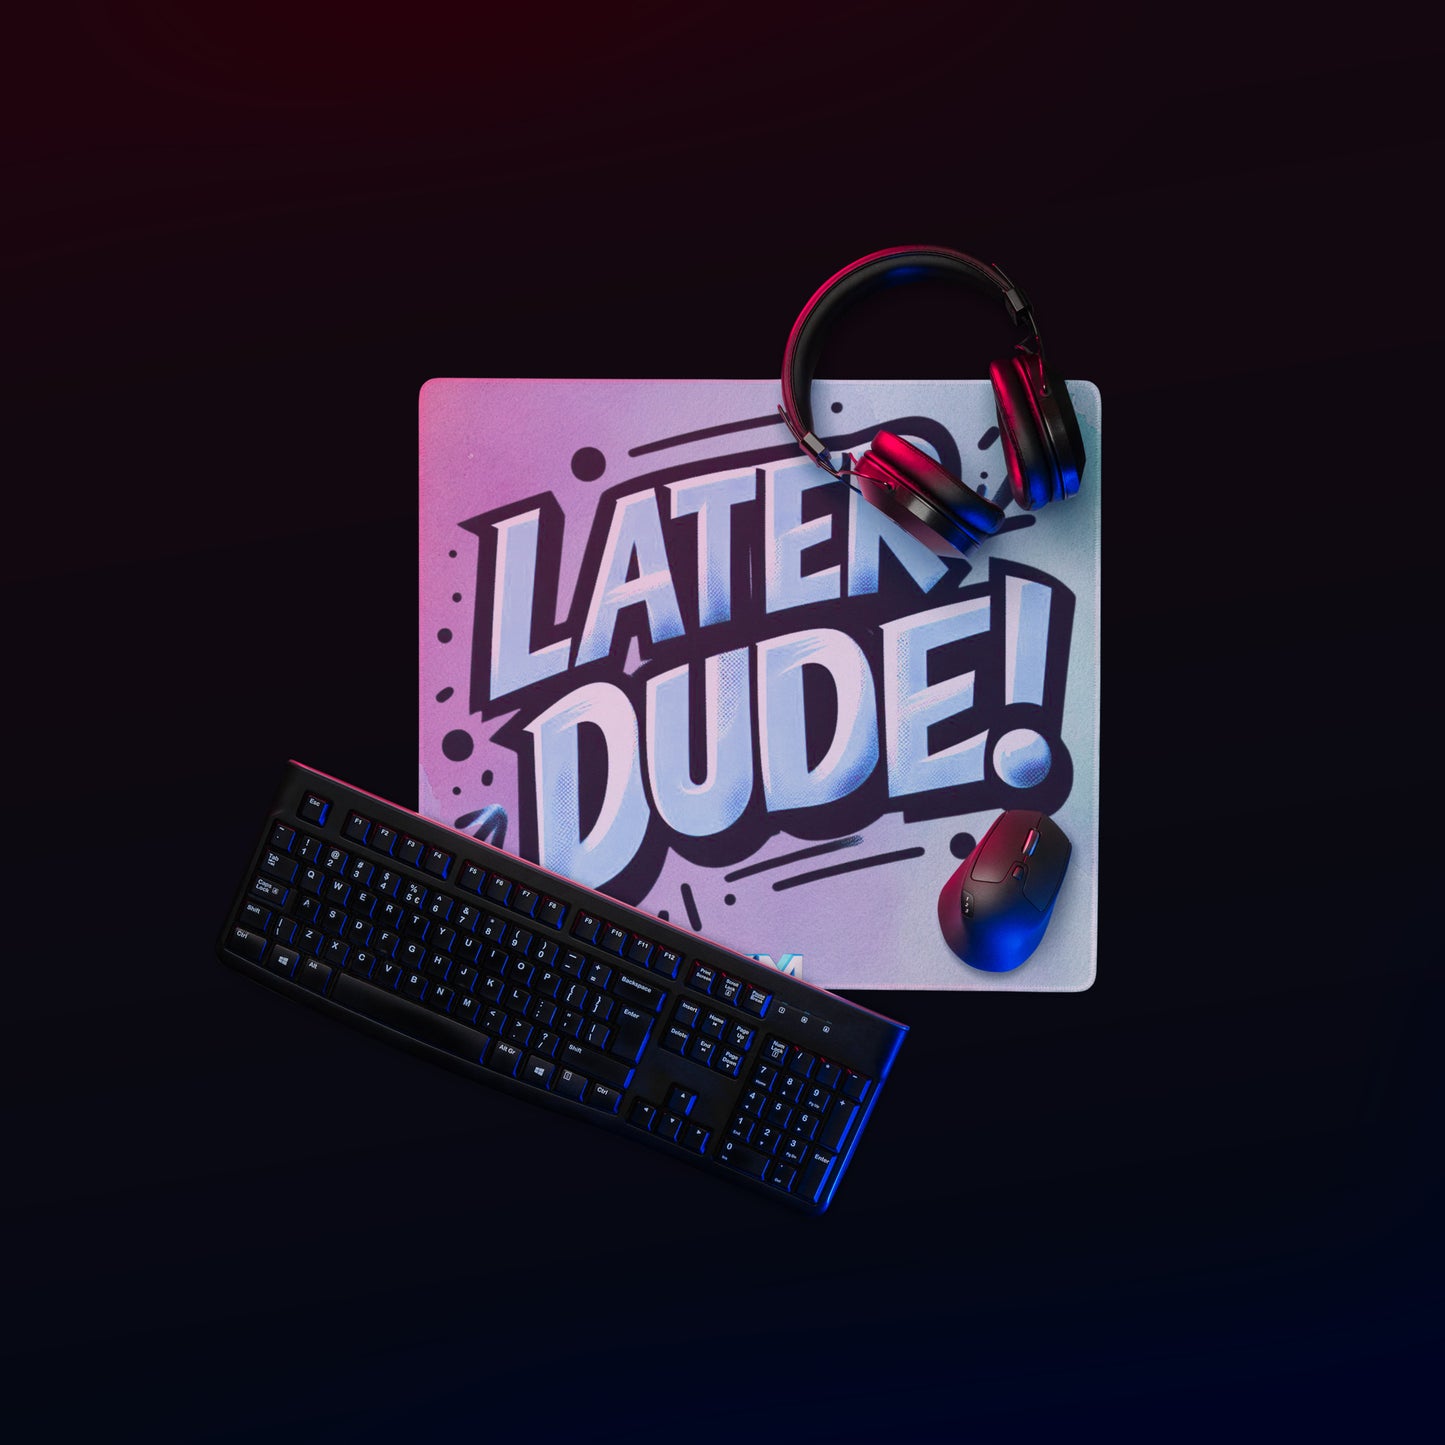 Pastel Later Dude Gaming mouse pad